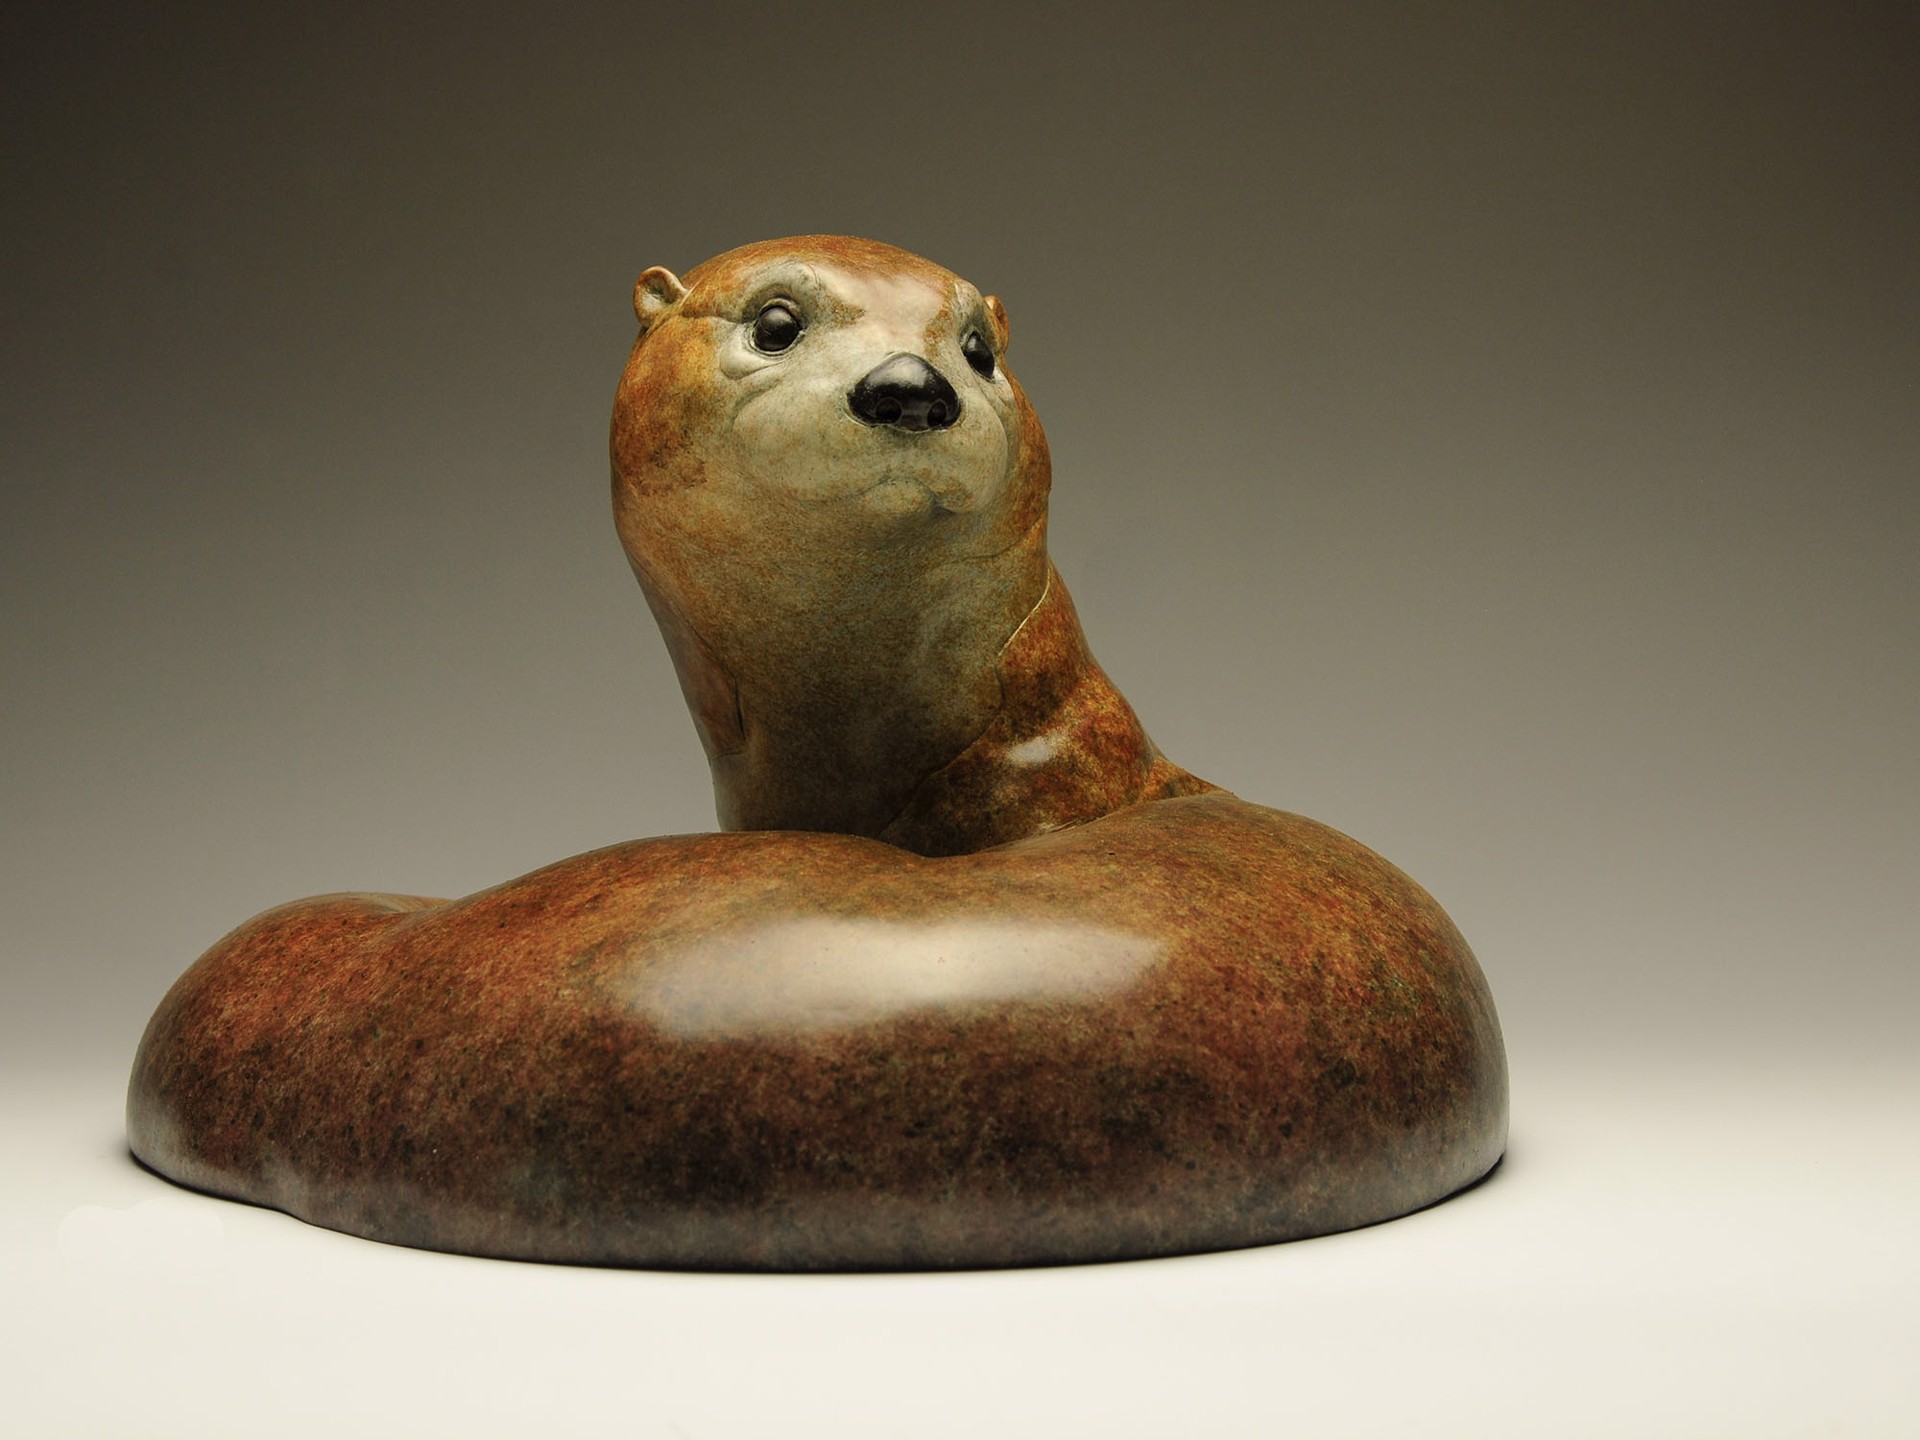 A Bronze Sculpture Of An Otter Curled Up In A Circle Featuring A Contemporary Patina And Smooth Surface, By Jeremy Bradshaw, Available At Gallery Wild